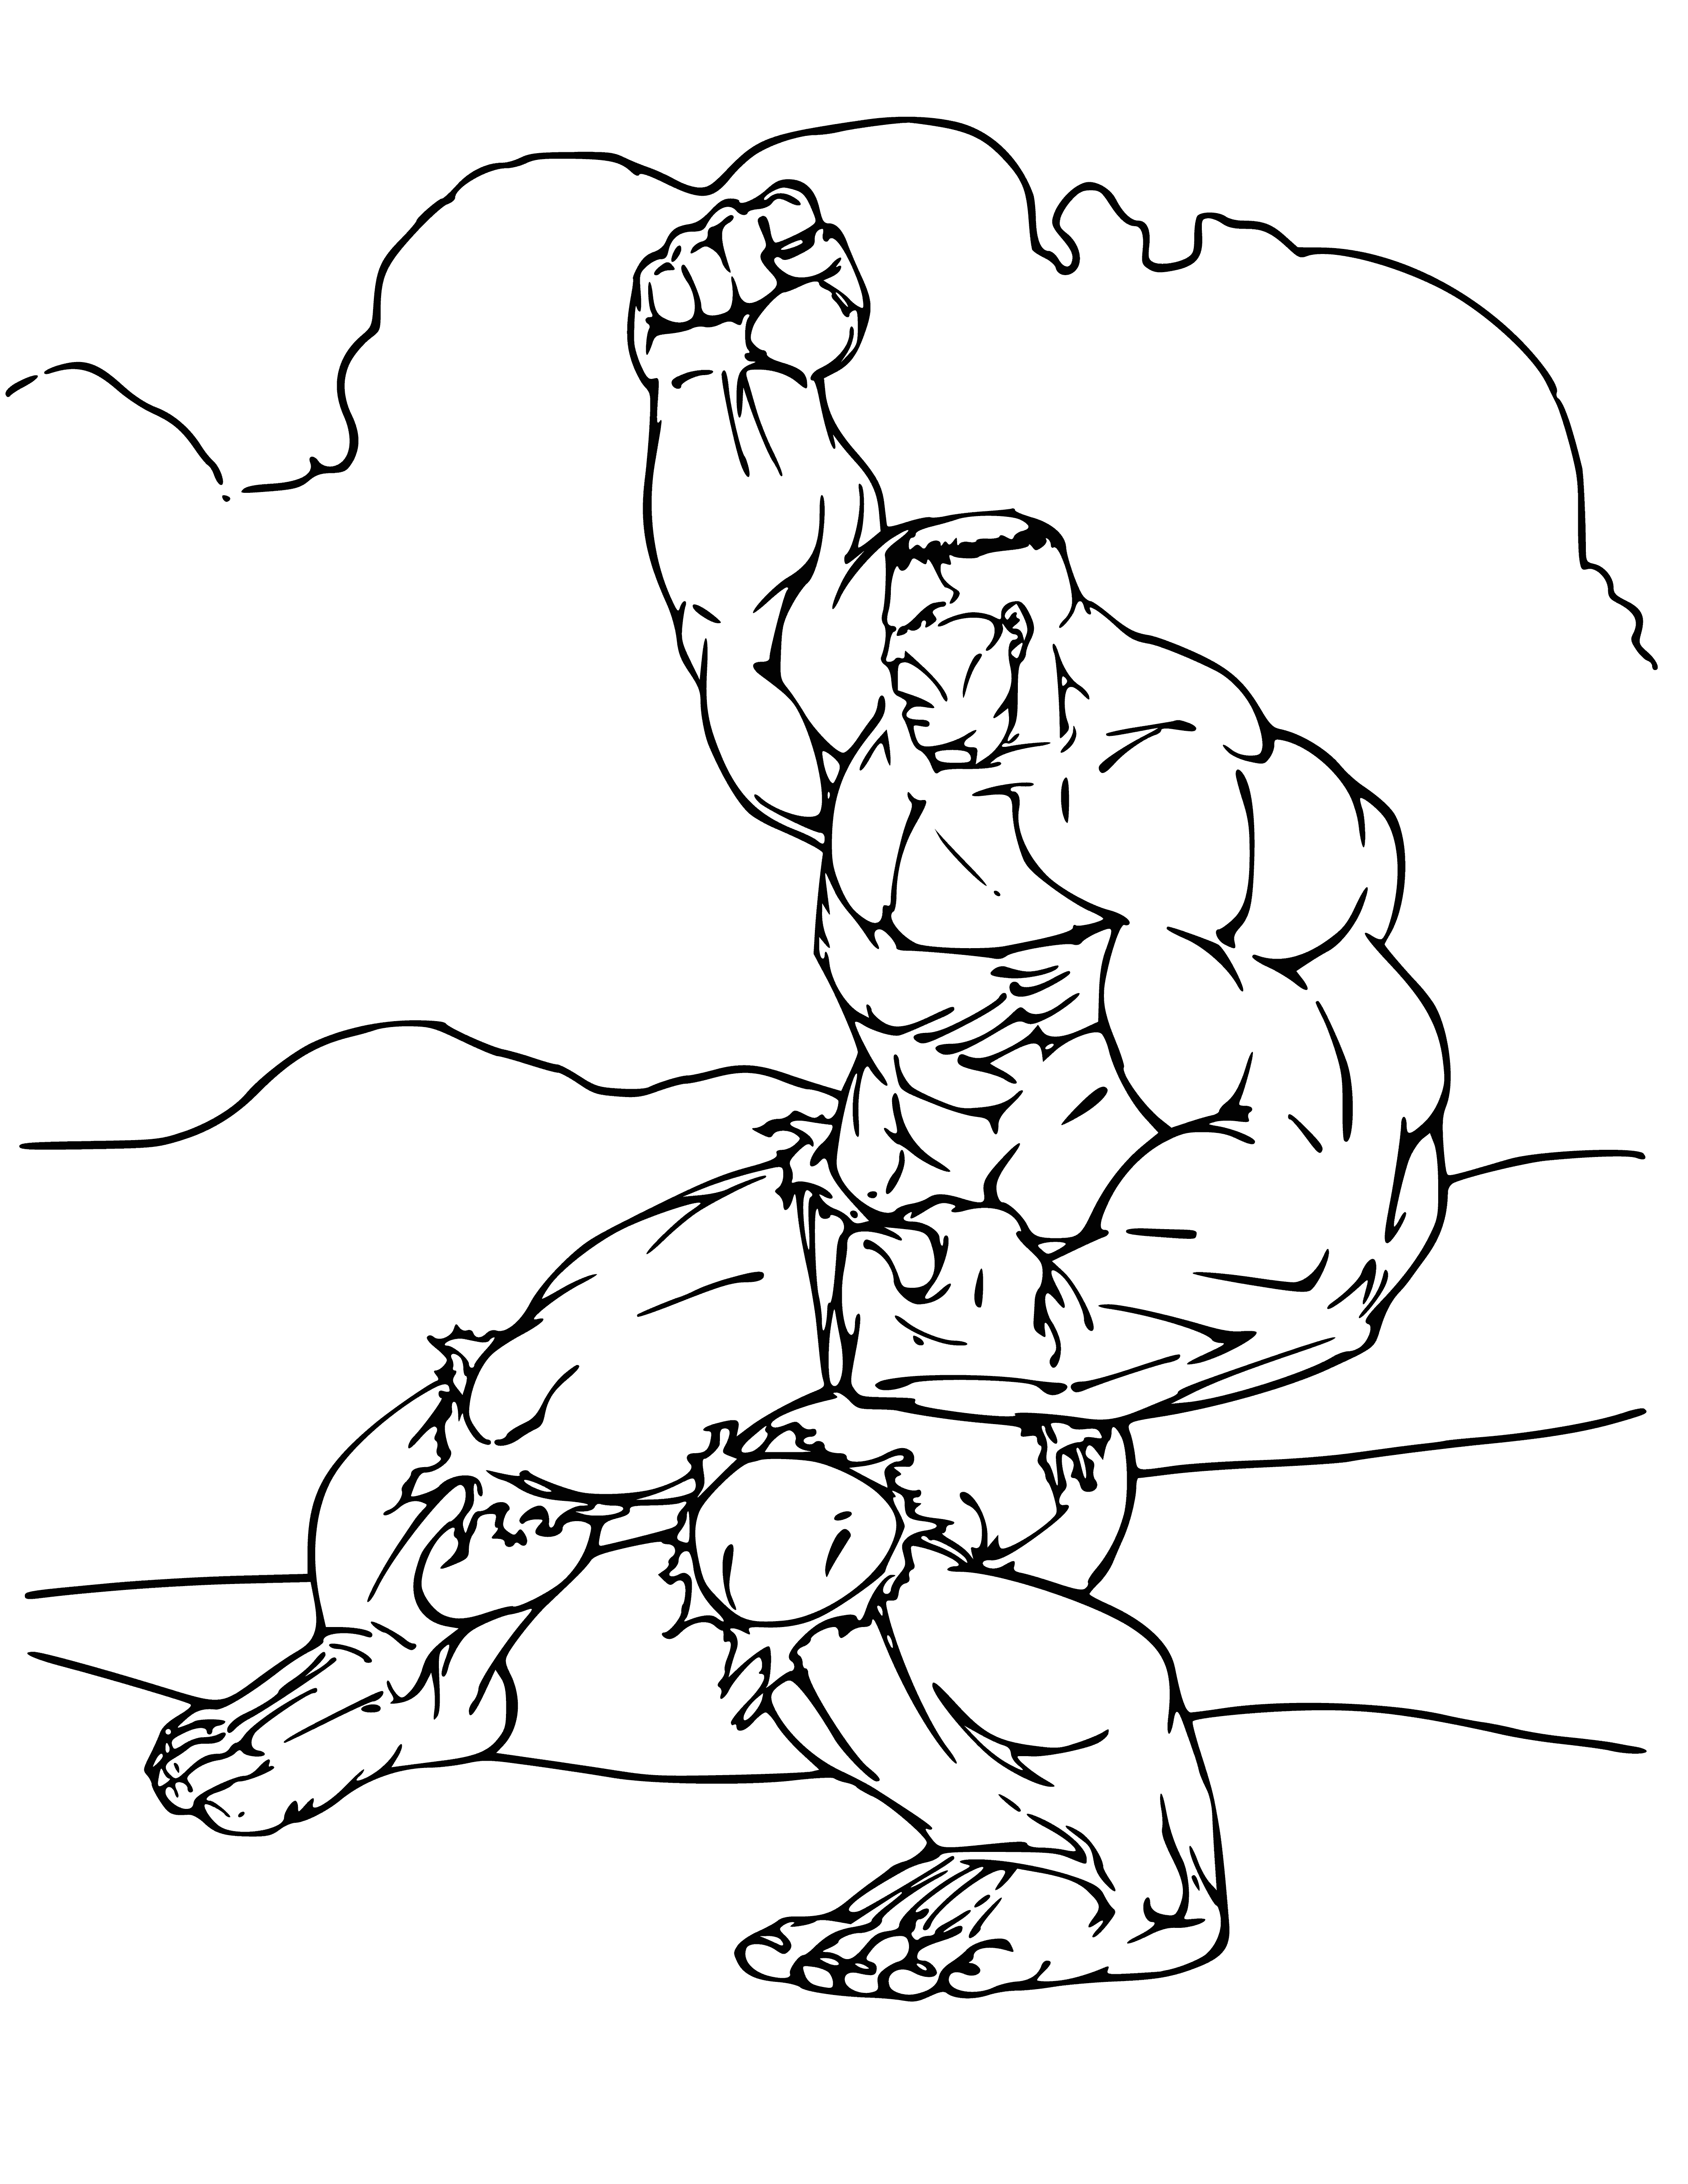 coloring page: The Hulk is a big, green, furry creature with big hands and feet. He looks mean and angry. #thehulk